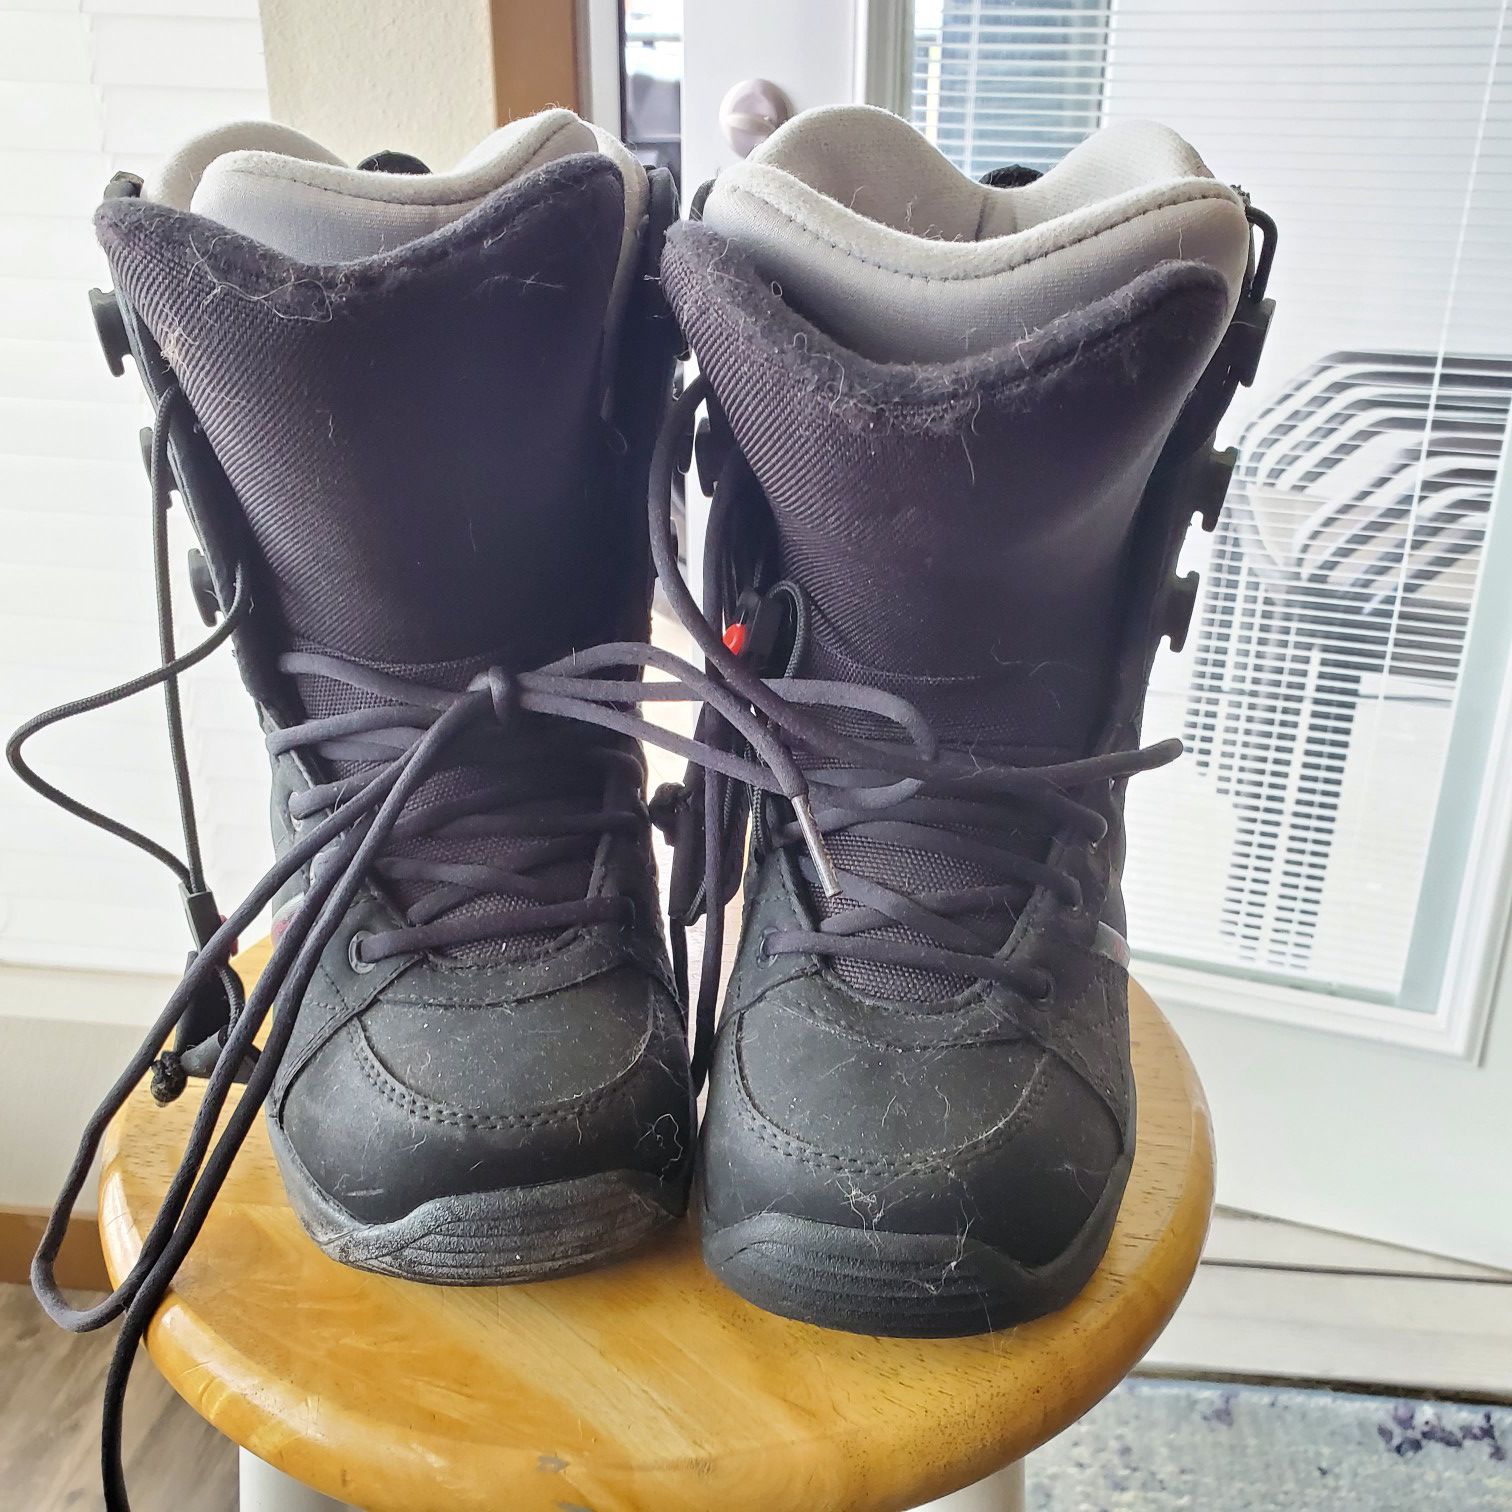 Womens snowboard boots